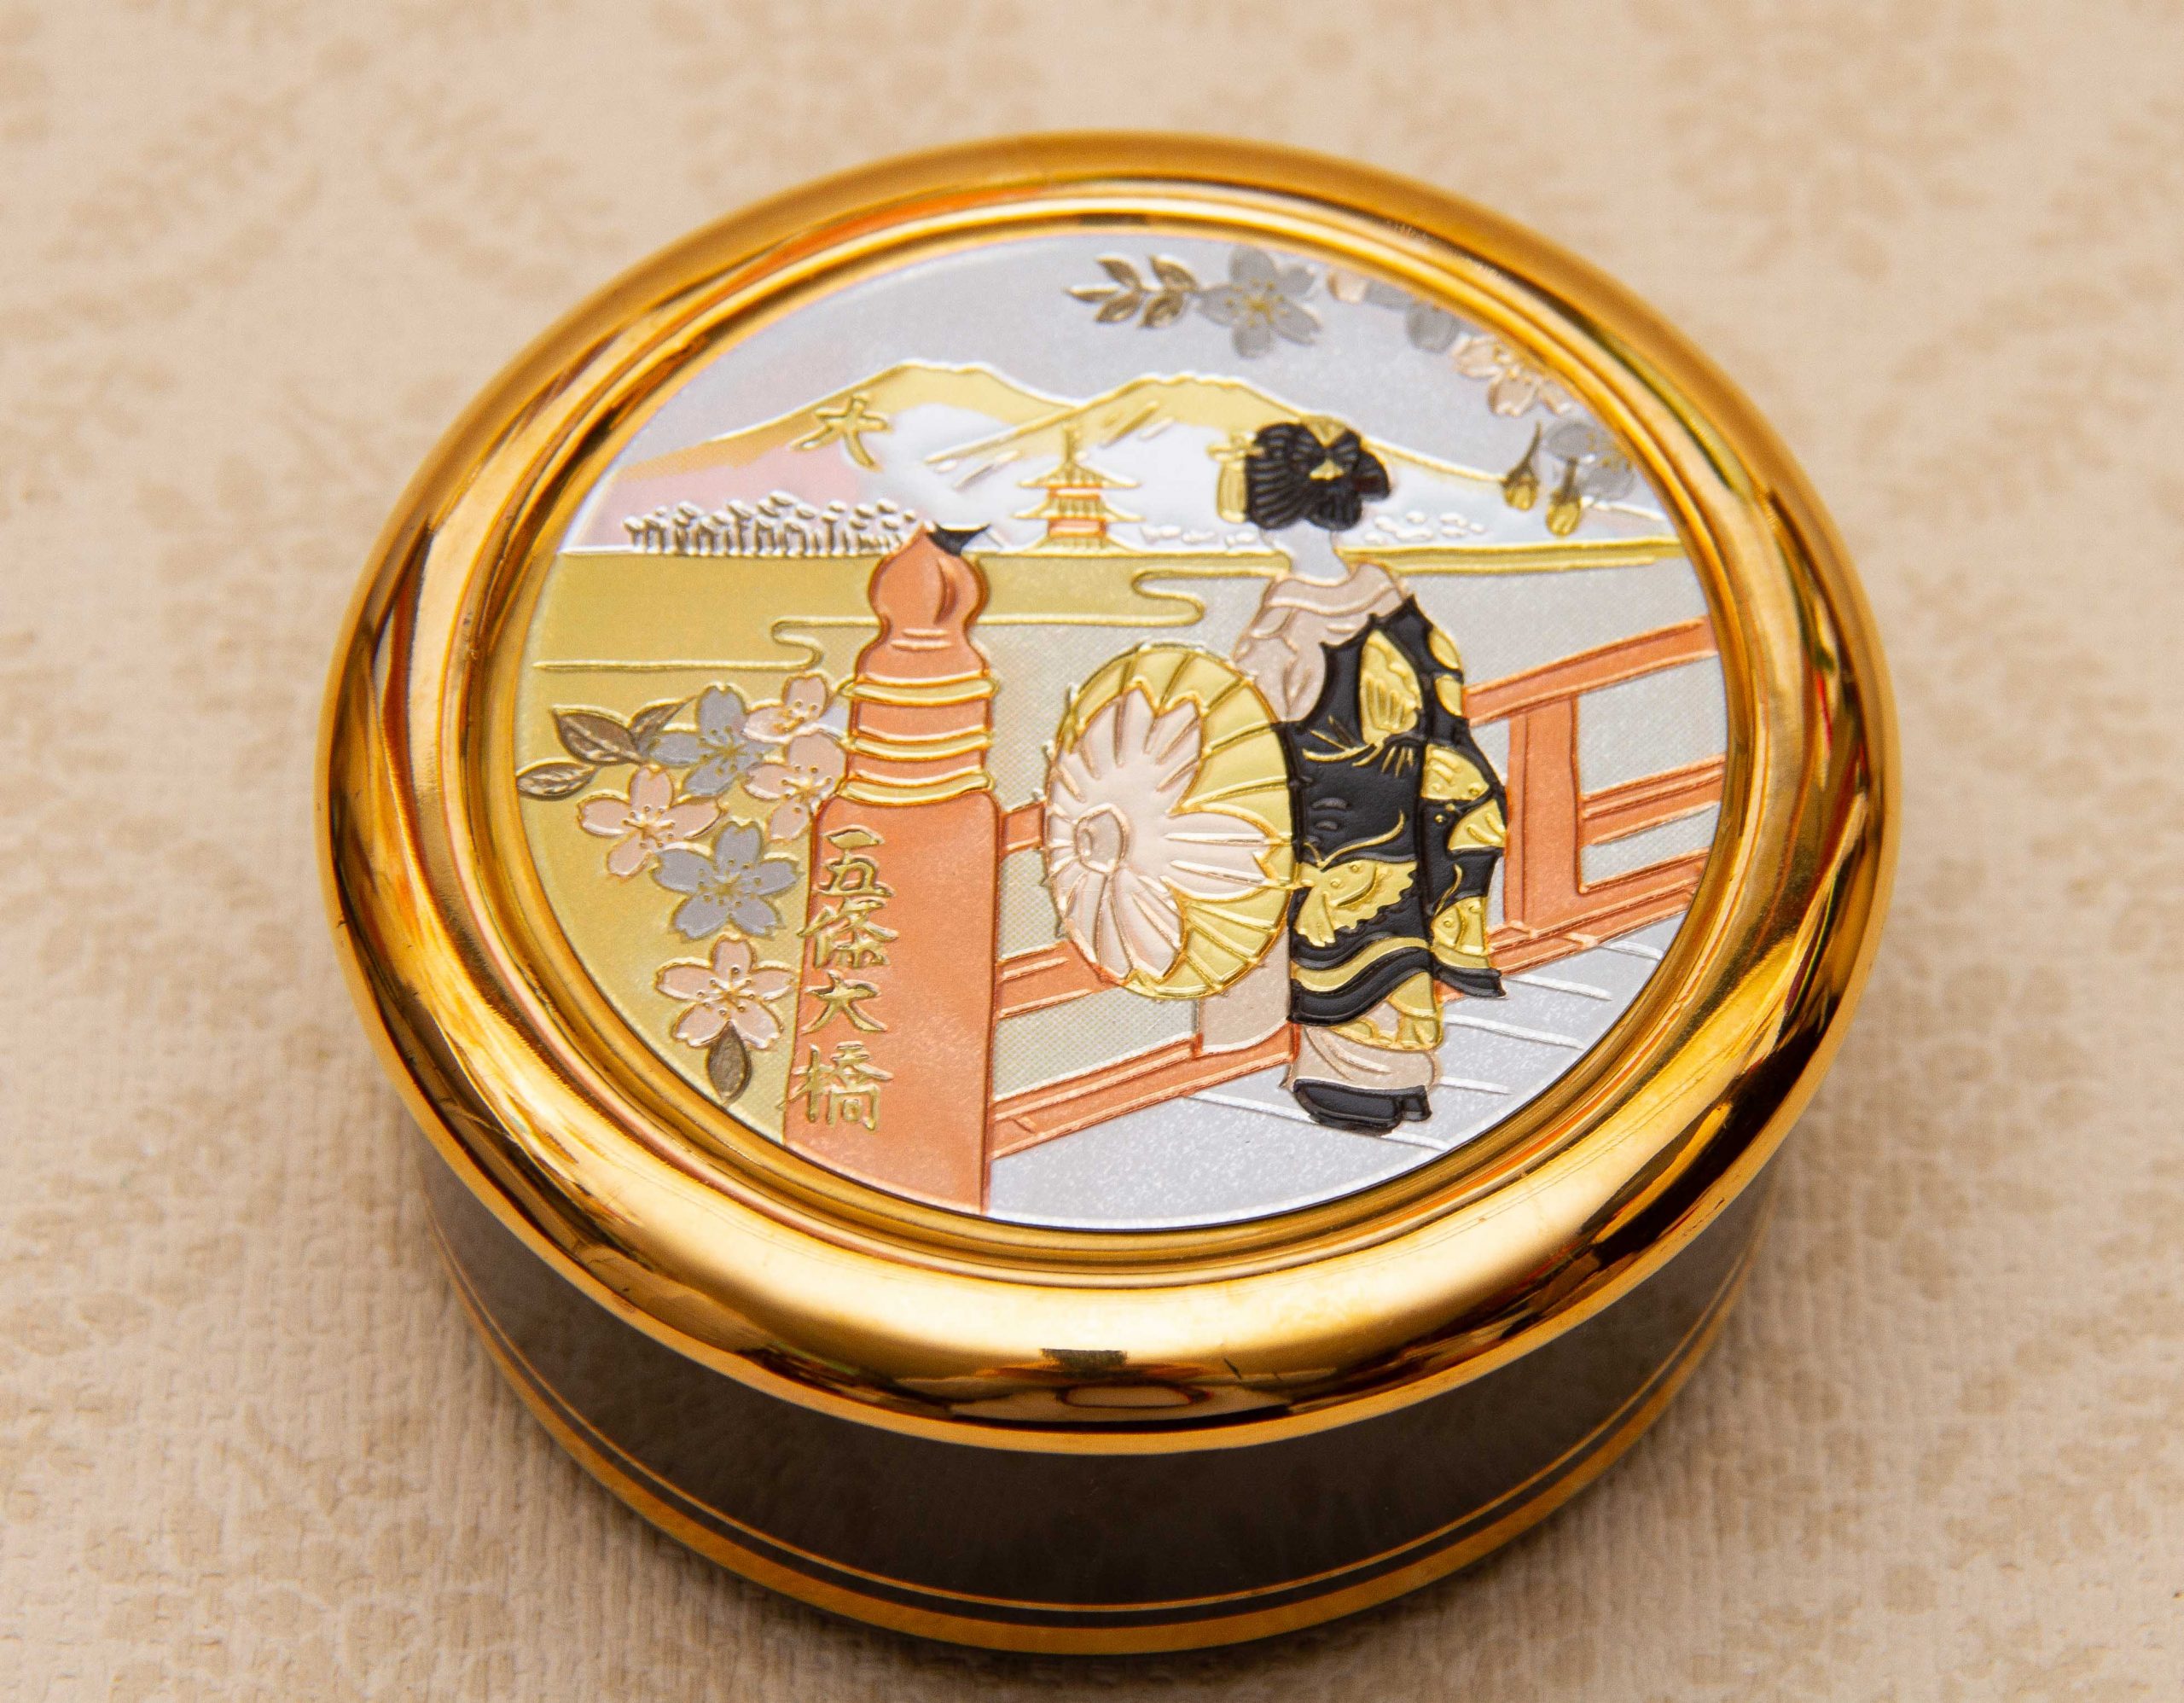 Collectable 24Kt Gold Japenese 'The Art Of Chokin' White and Gold Trinket Box